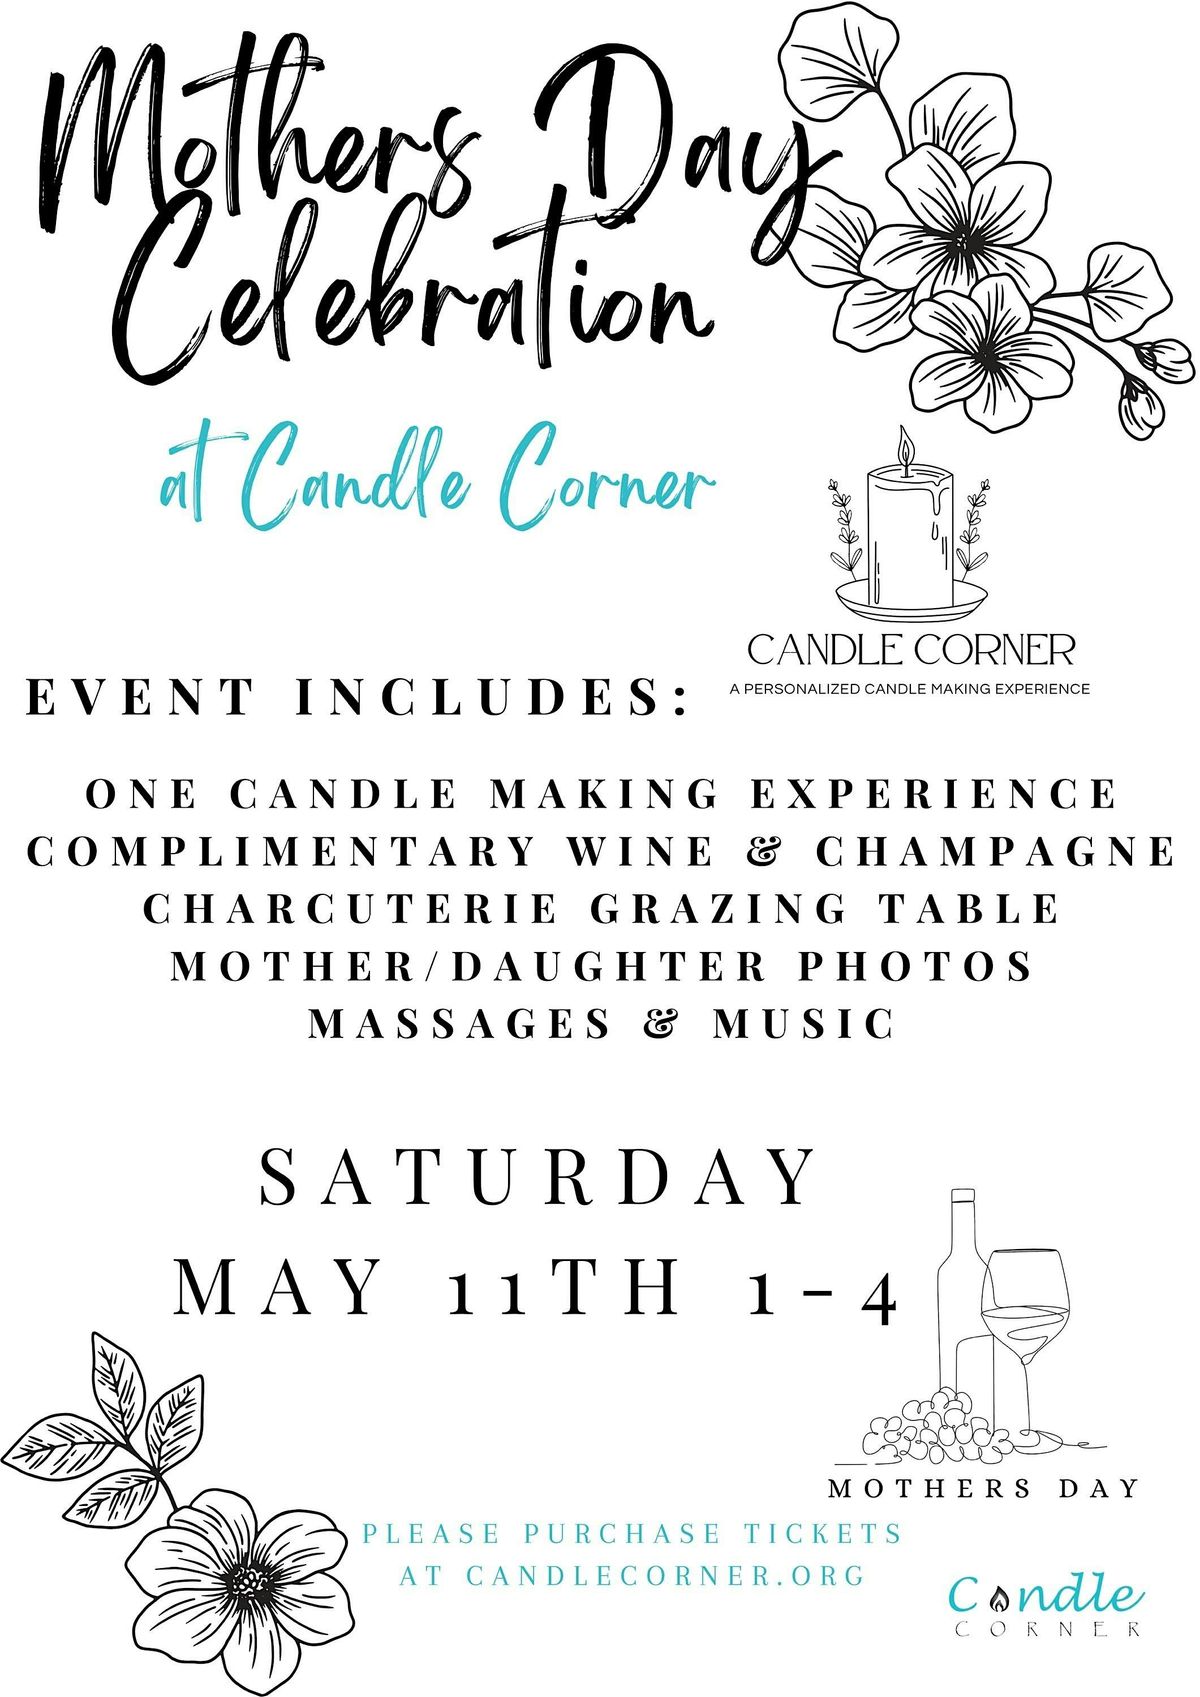 Mother's Day Celebration at Candle Corner